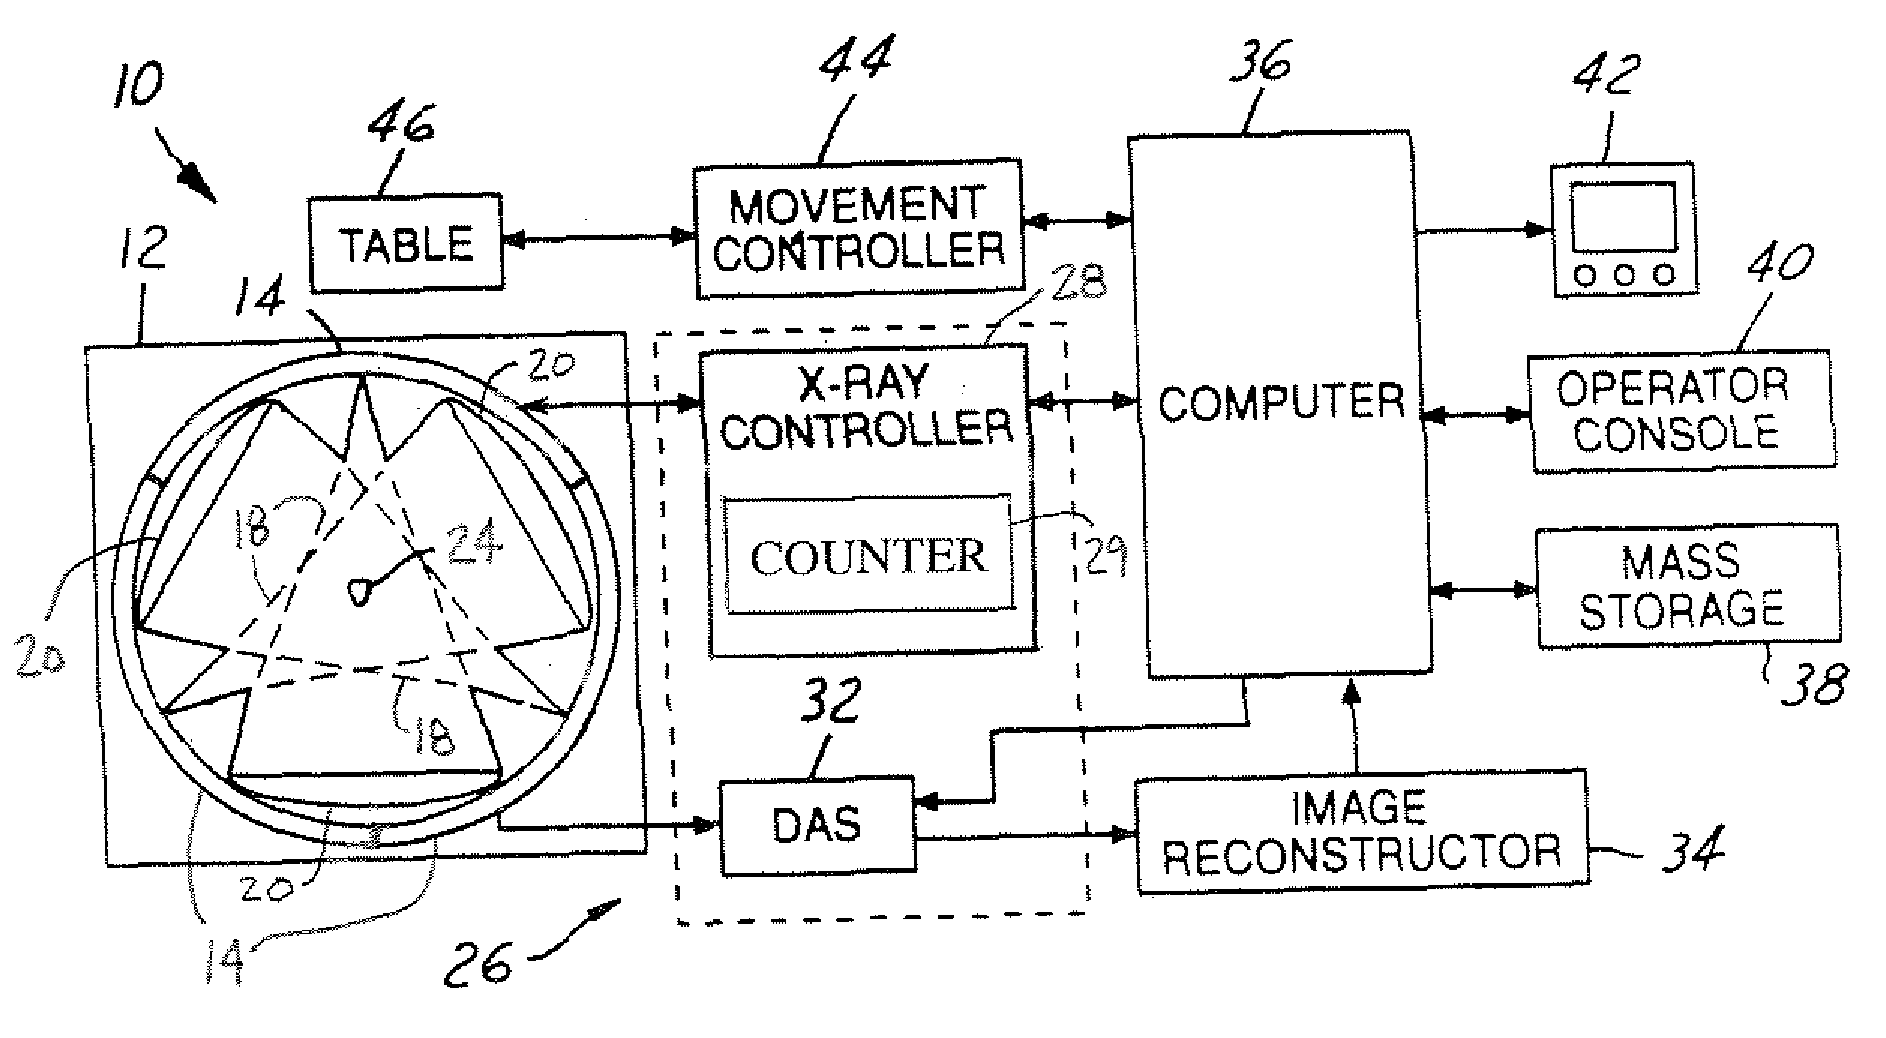 Emitter array configurations for a stationary ct system